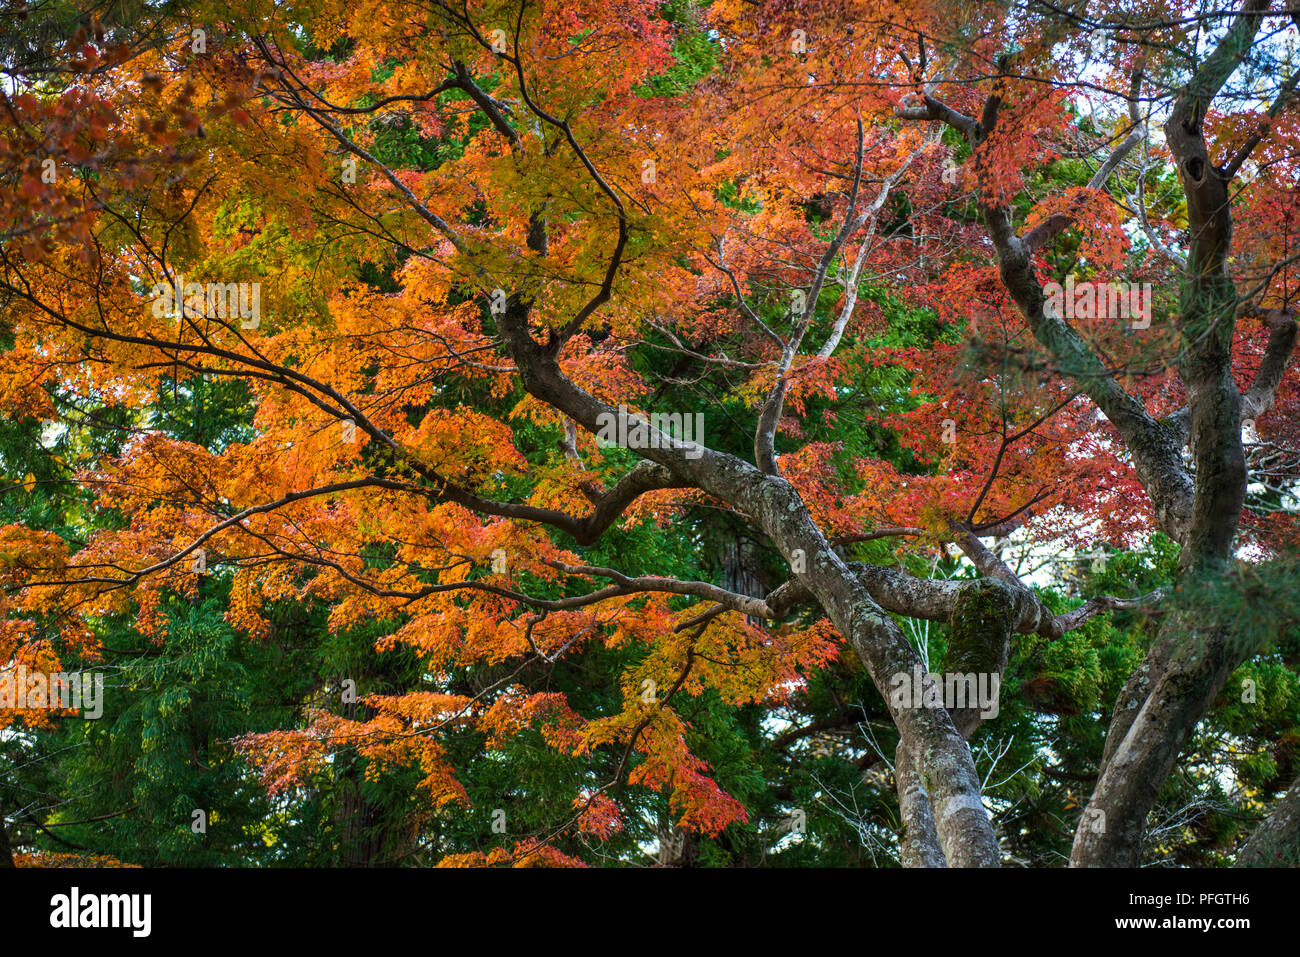 Orange and red Autumn leaves on trees in Narita-San Temple Park in Narita, Japan Stock Photo